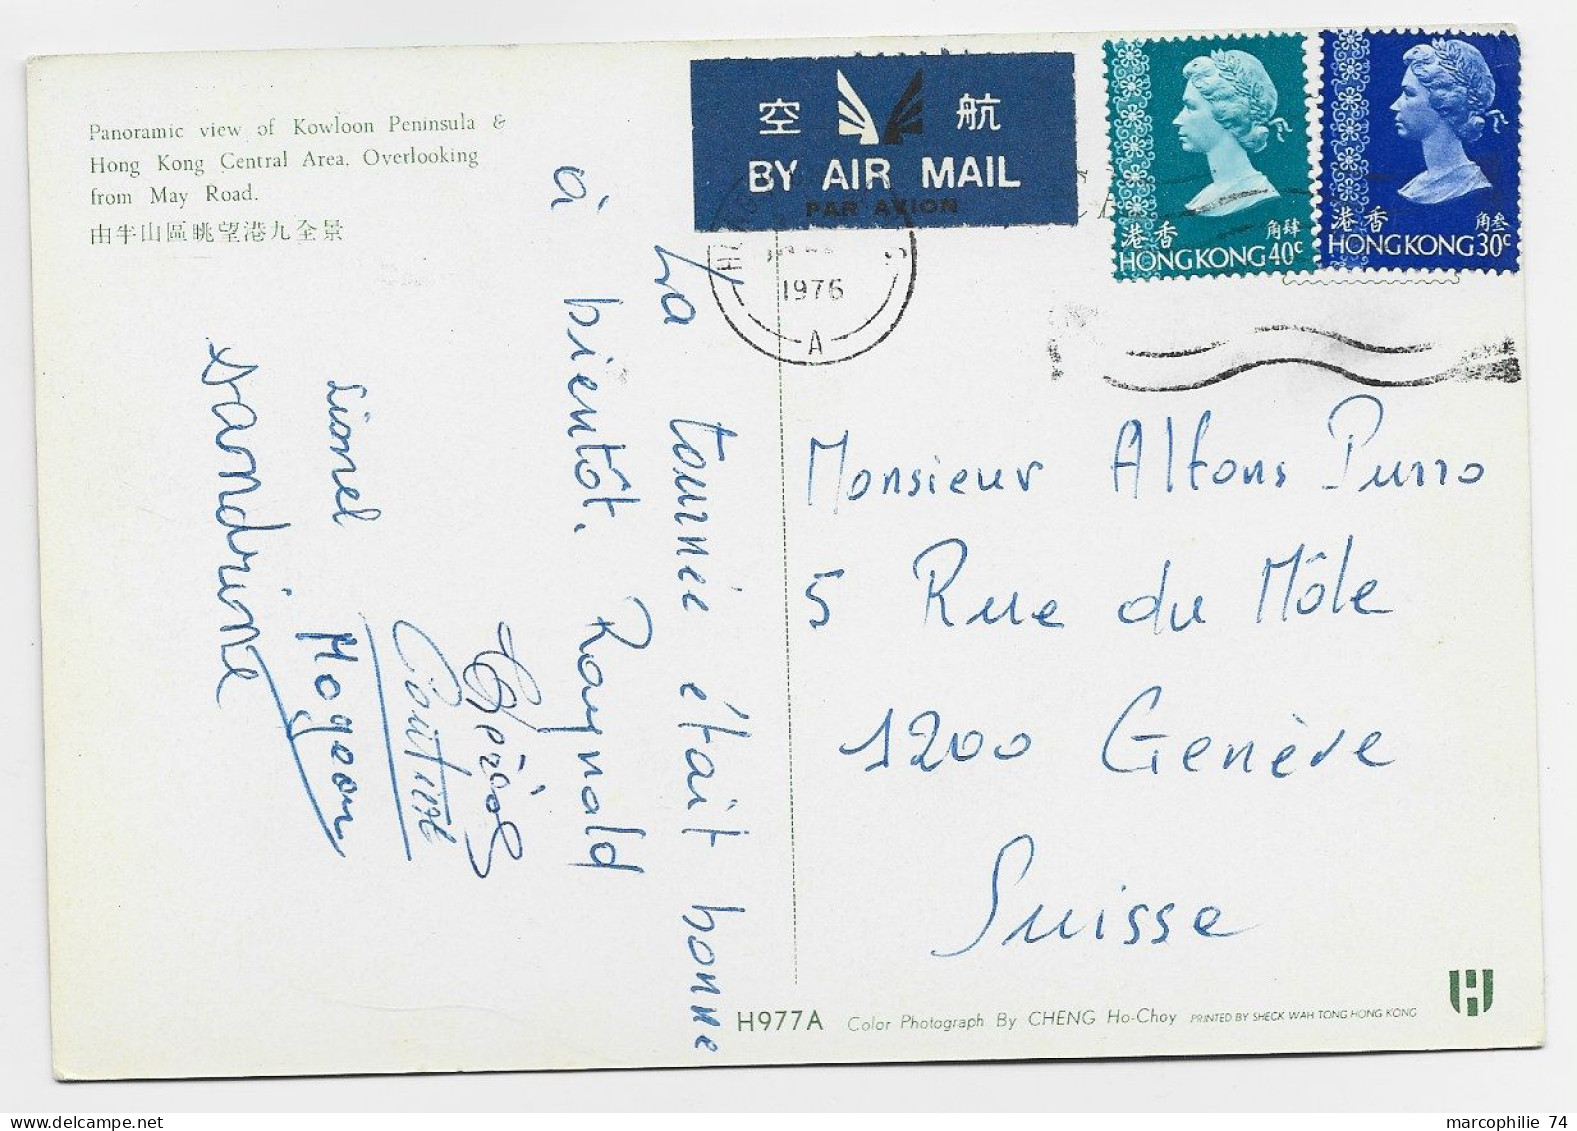 HONG KONG 40C+30C CARD AIR MAIL 1976 TO SUISSE - Lettres & Documents